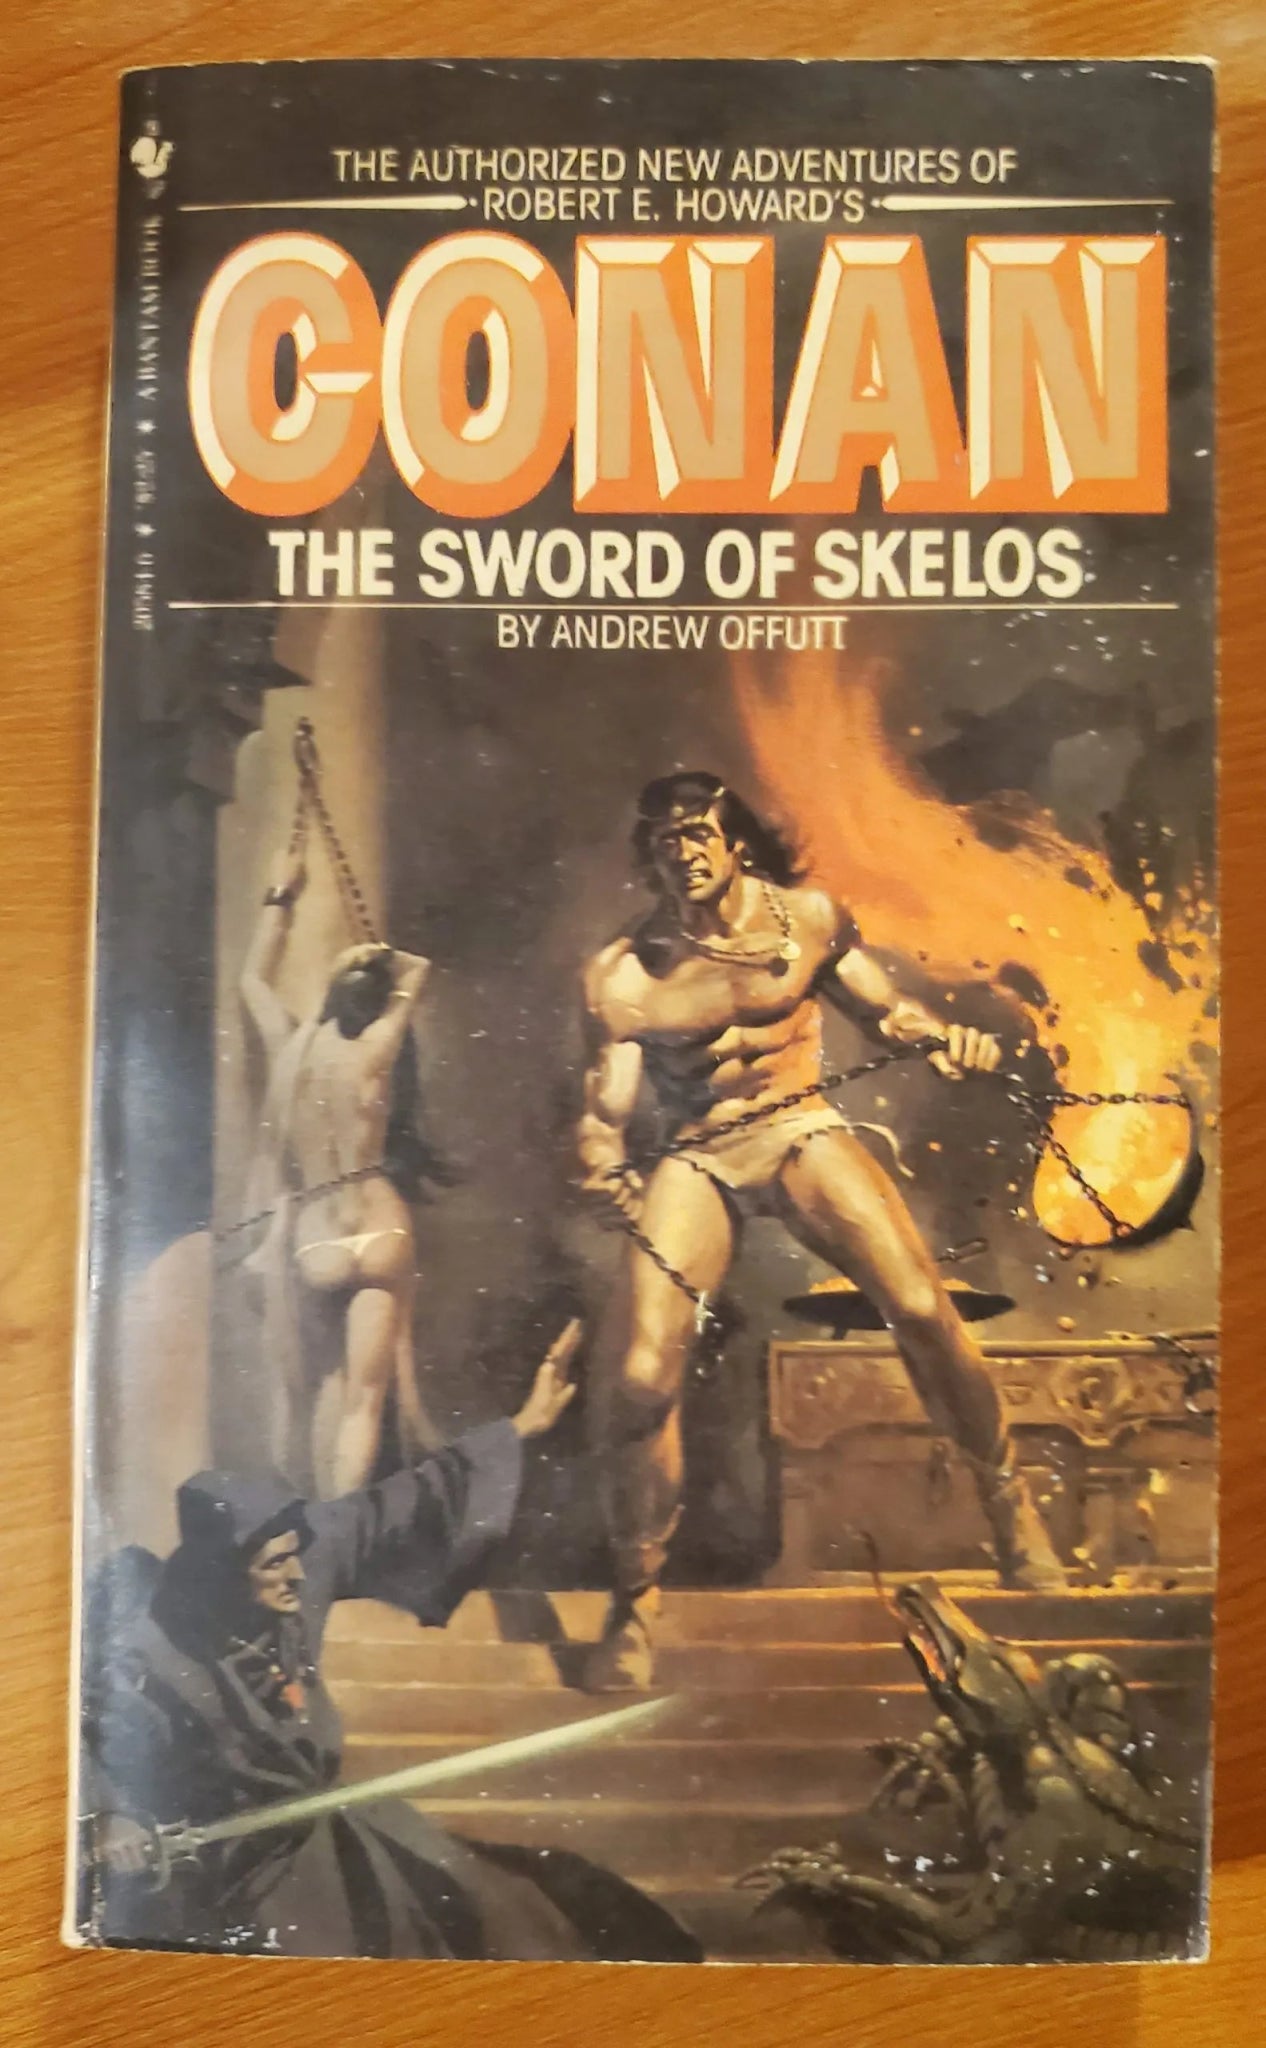 Steady Bunny Shop - Conan The Sword Of Skelos - Andrew Offutt - Paperback Book - Steady Bunny Shop